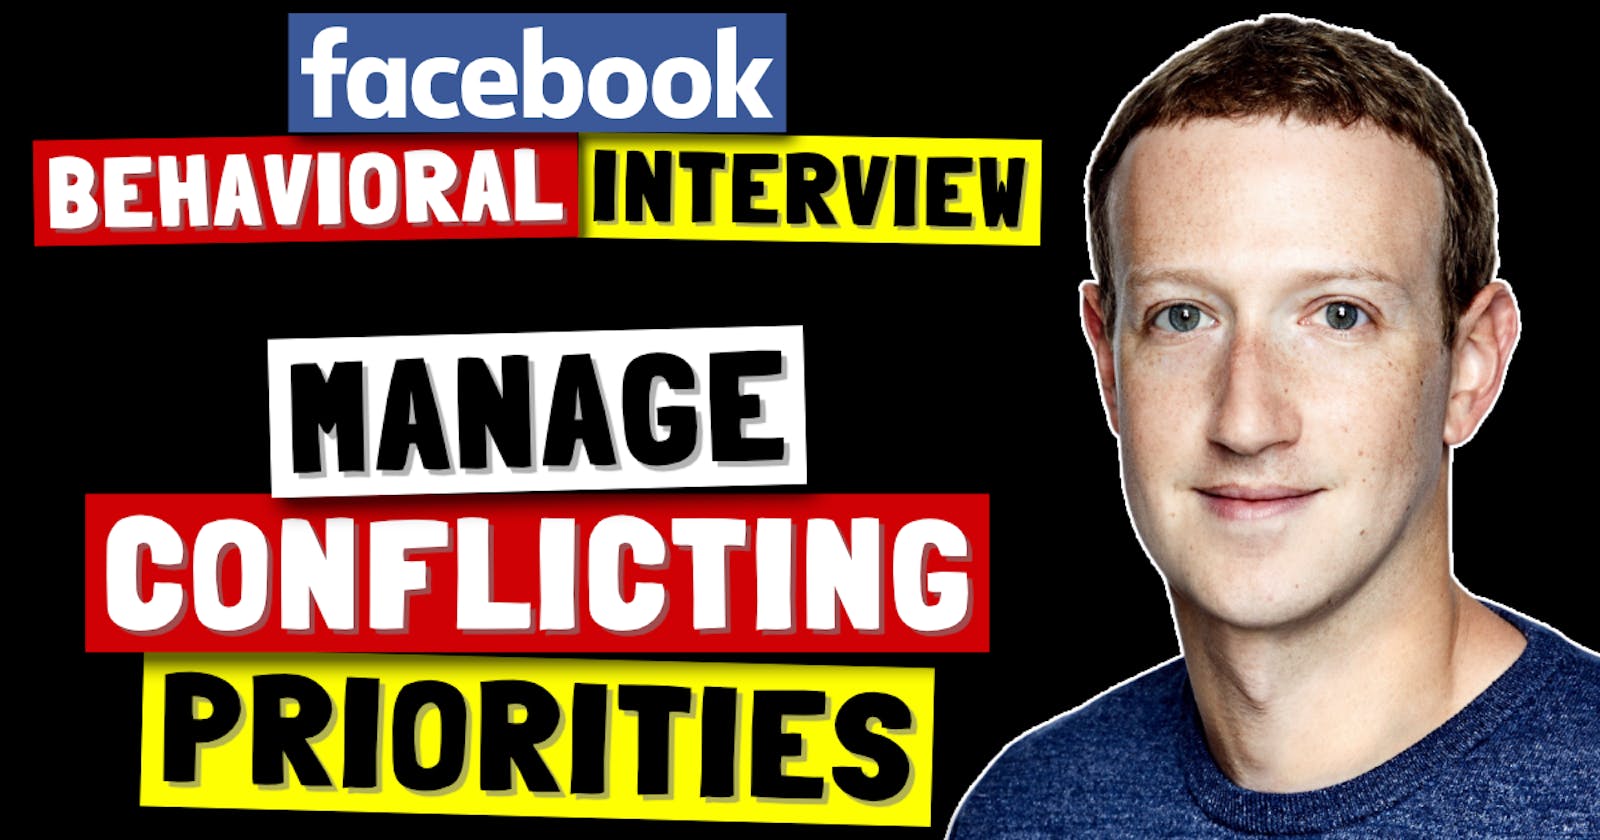 ✅ Tell Me About A Time You Had To Manage Conflicting Priorities | Facebook Behavioral (Jedi) Interview Series 🔥